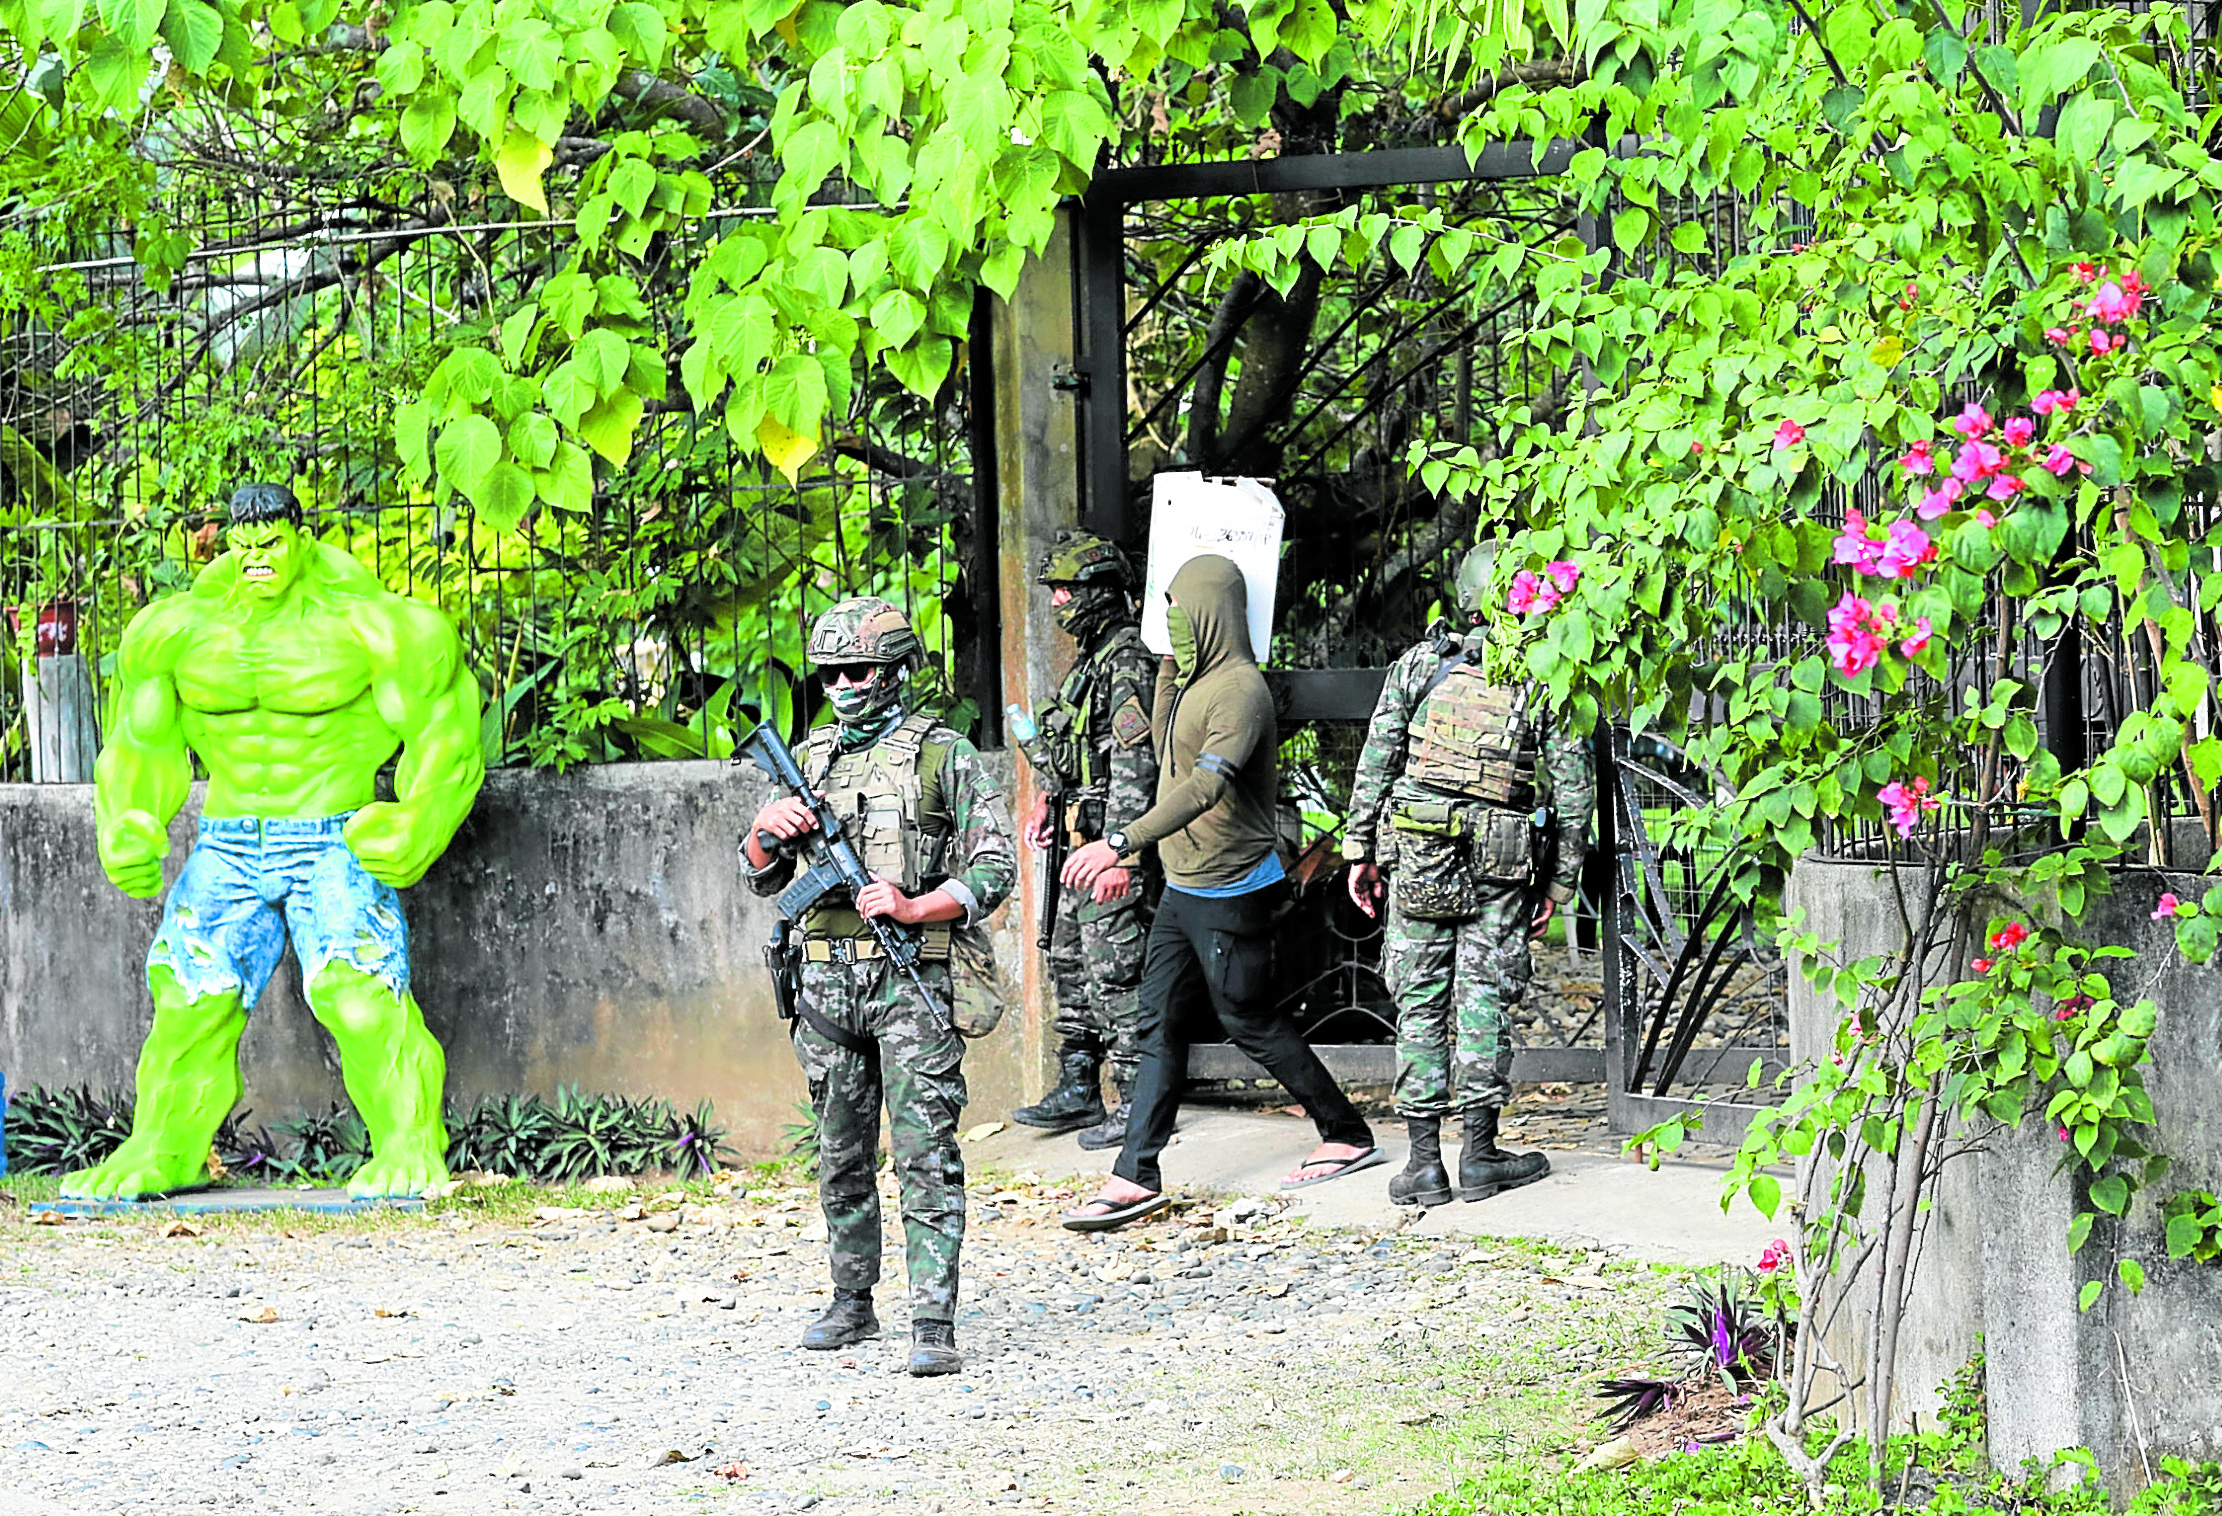 Agents of the Criminal Investigation and Detection Group guard a house, one of several properties in Negros Oriental belonging to Rep. Arnolfo “Arnie” Teves Jr., during a raid on Friday in search of loose firearms